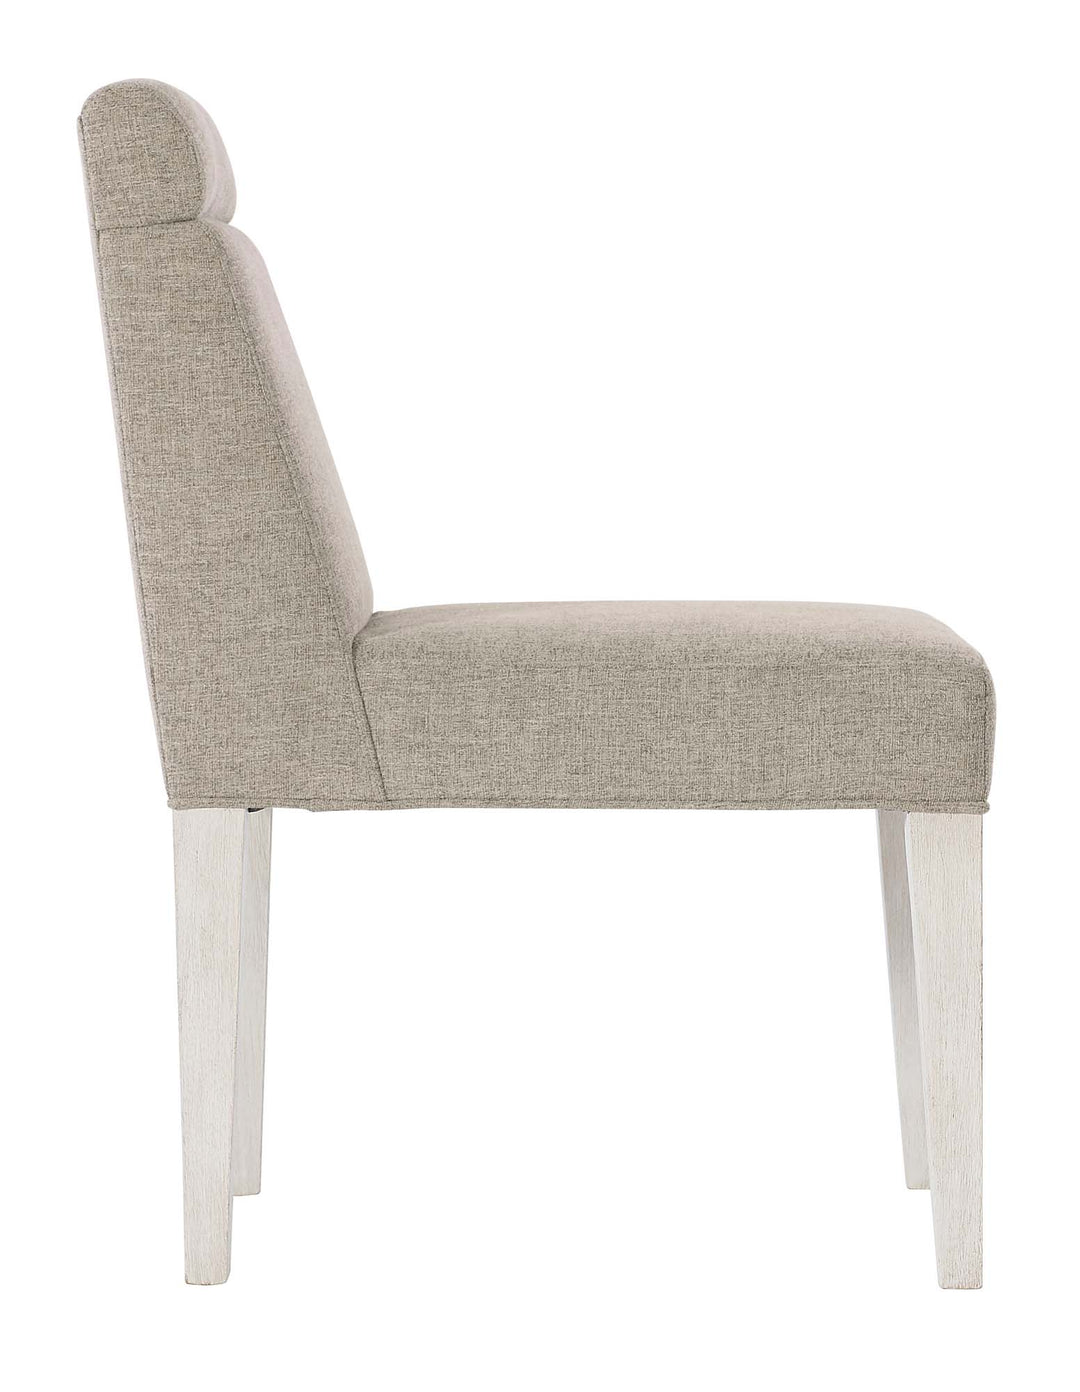 FOUNDATIONS SIDE CHAIR LINEN